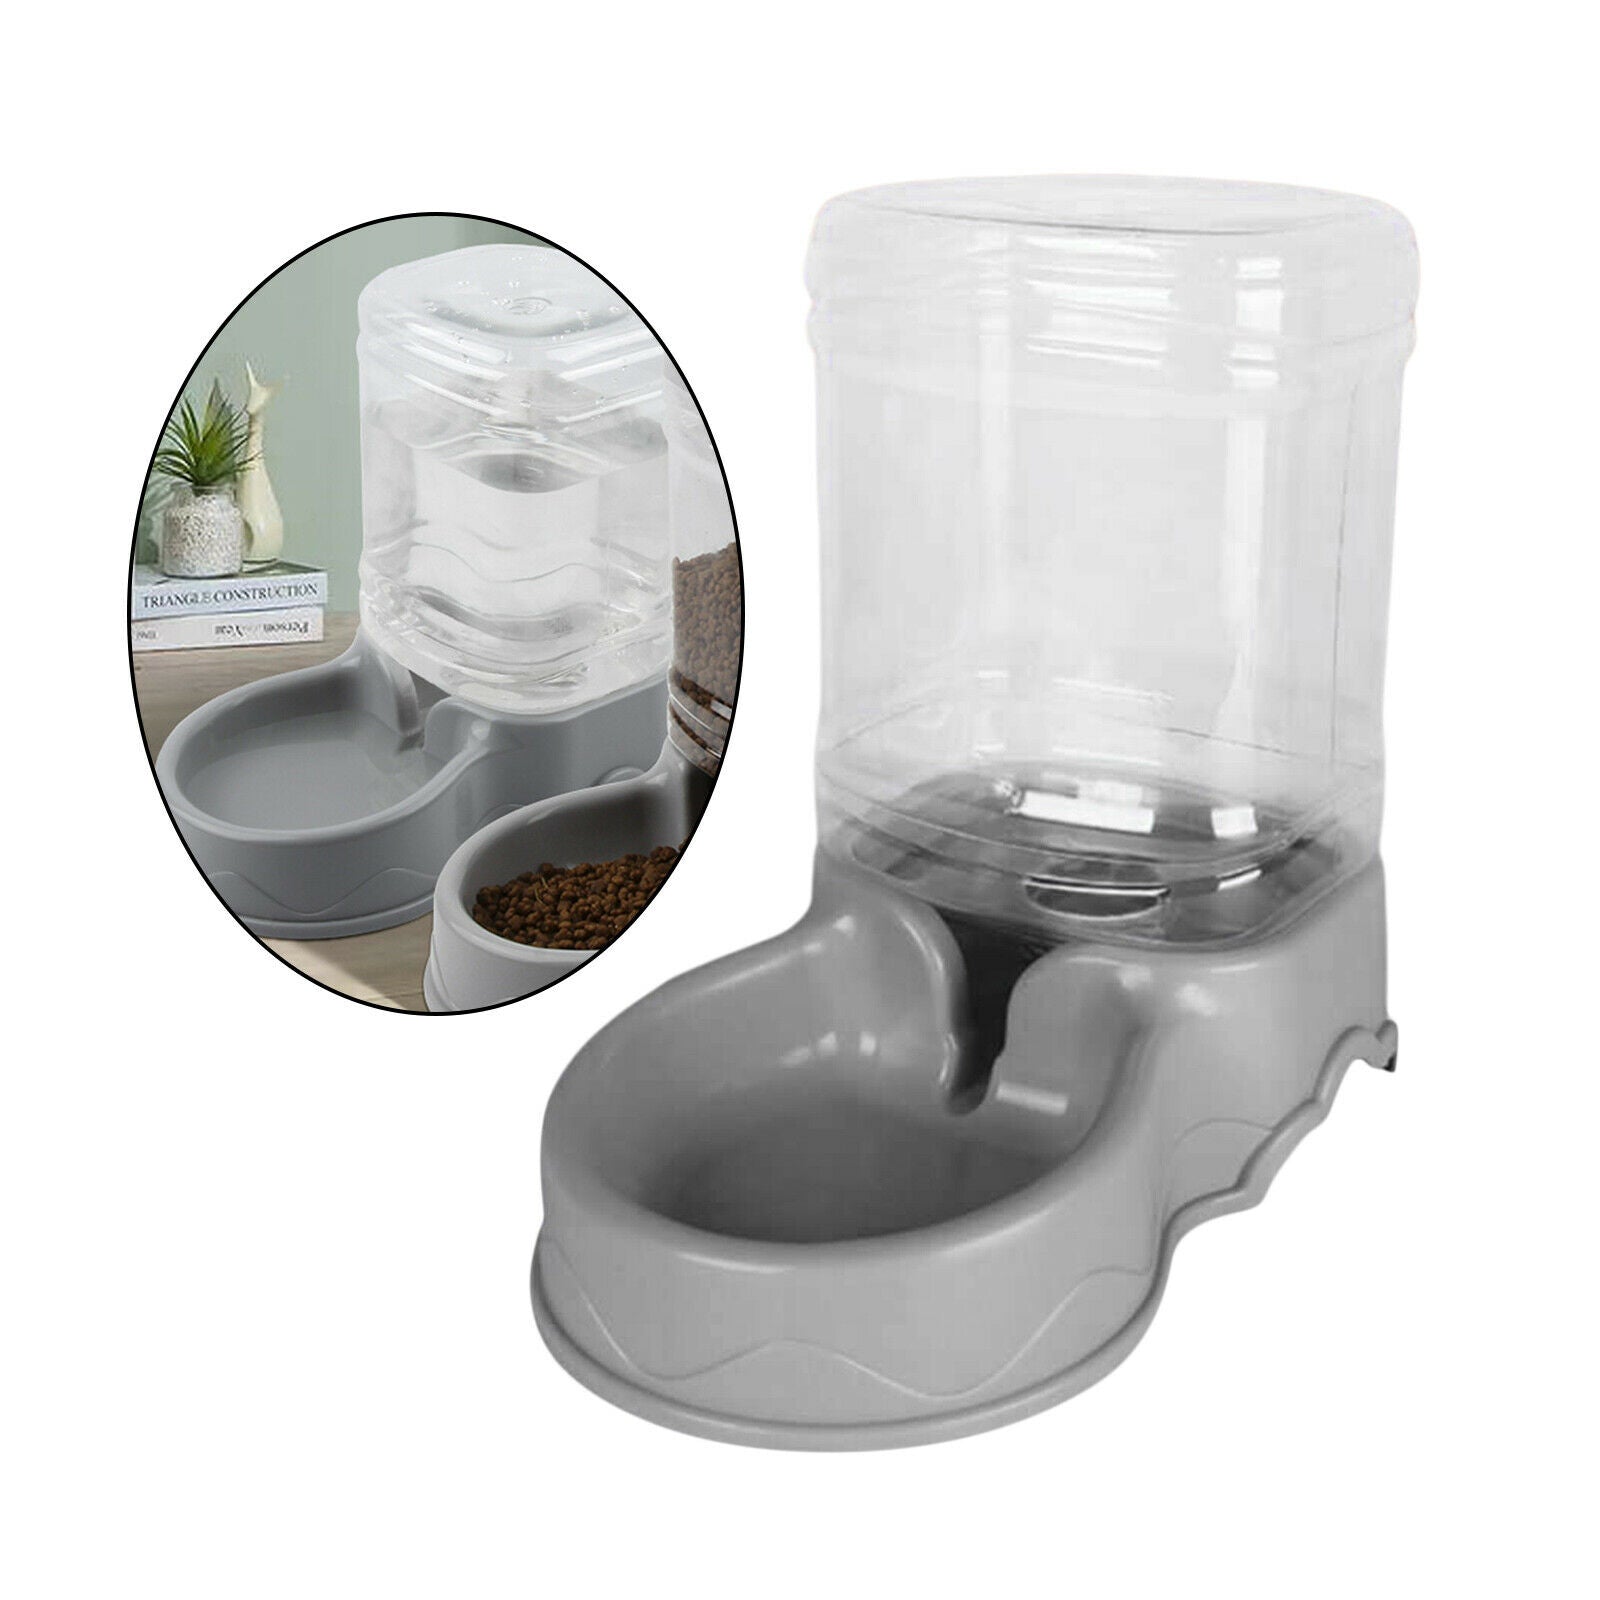 2x Automatic Feeder Small Medium Large Pets Food Feeder 3.5L Travel Supply Water